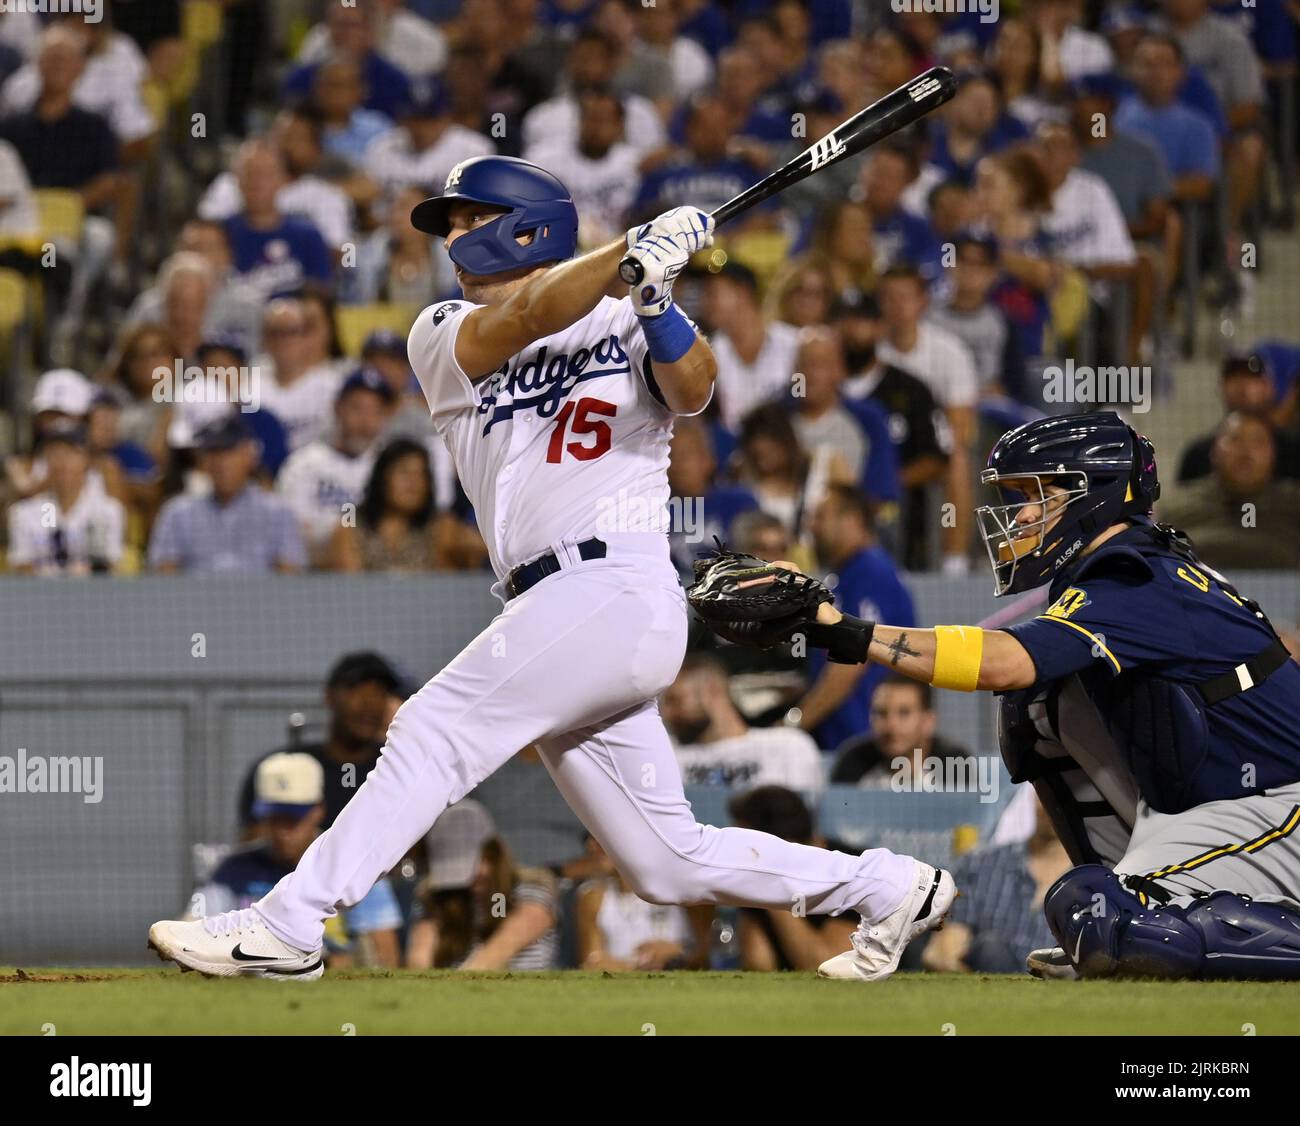 The Dodgers' bats have gone cold in the postseason. Now they're facing  playoff elimination – KXAN Austin